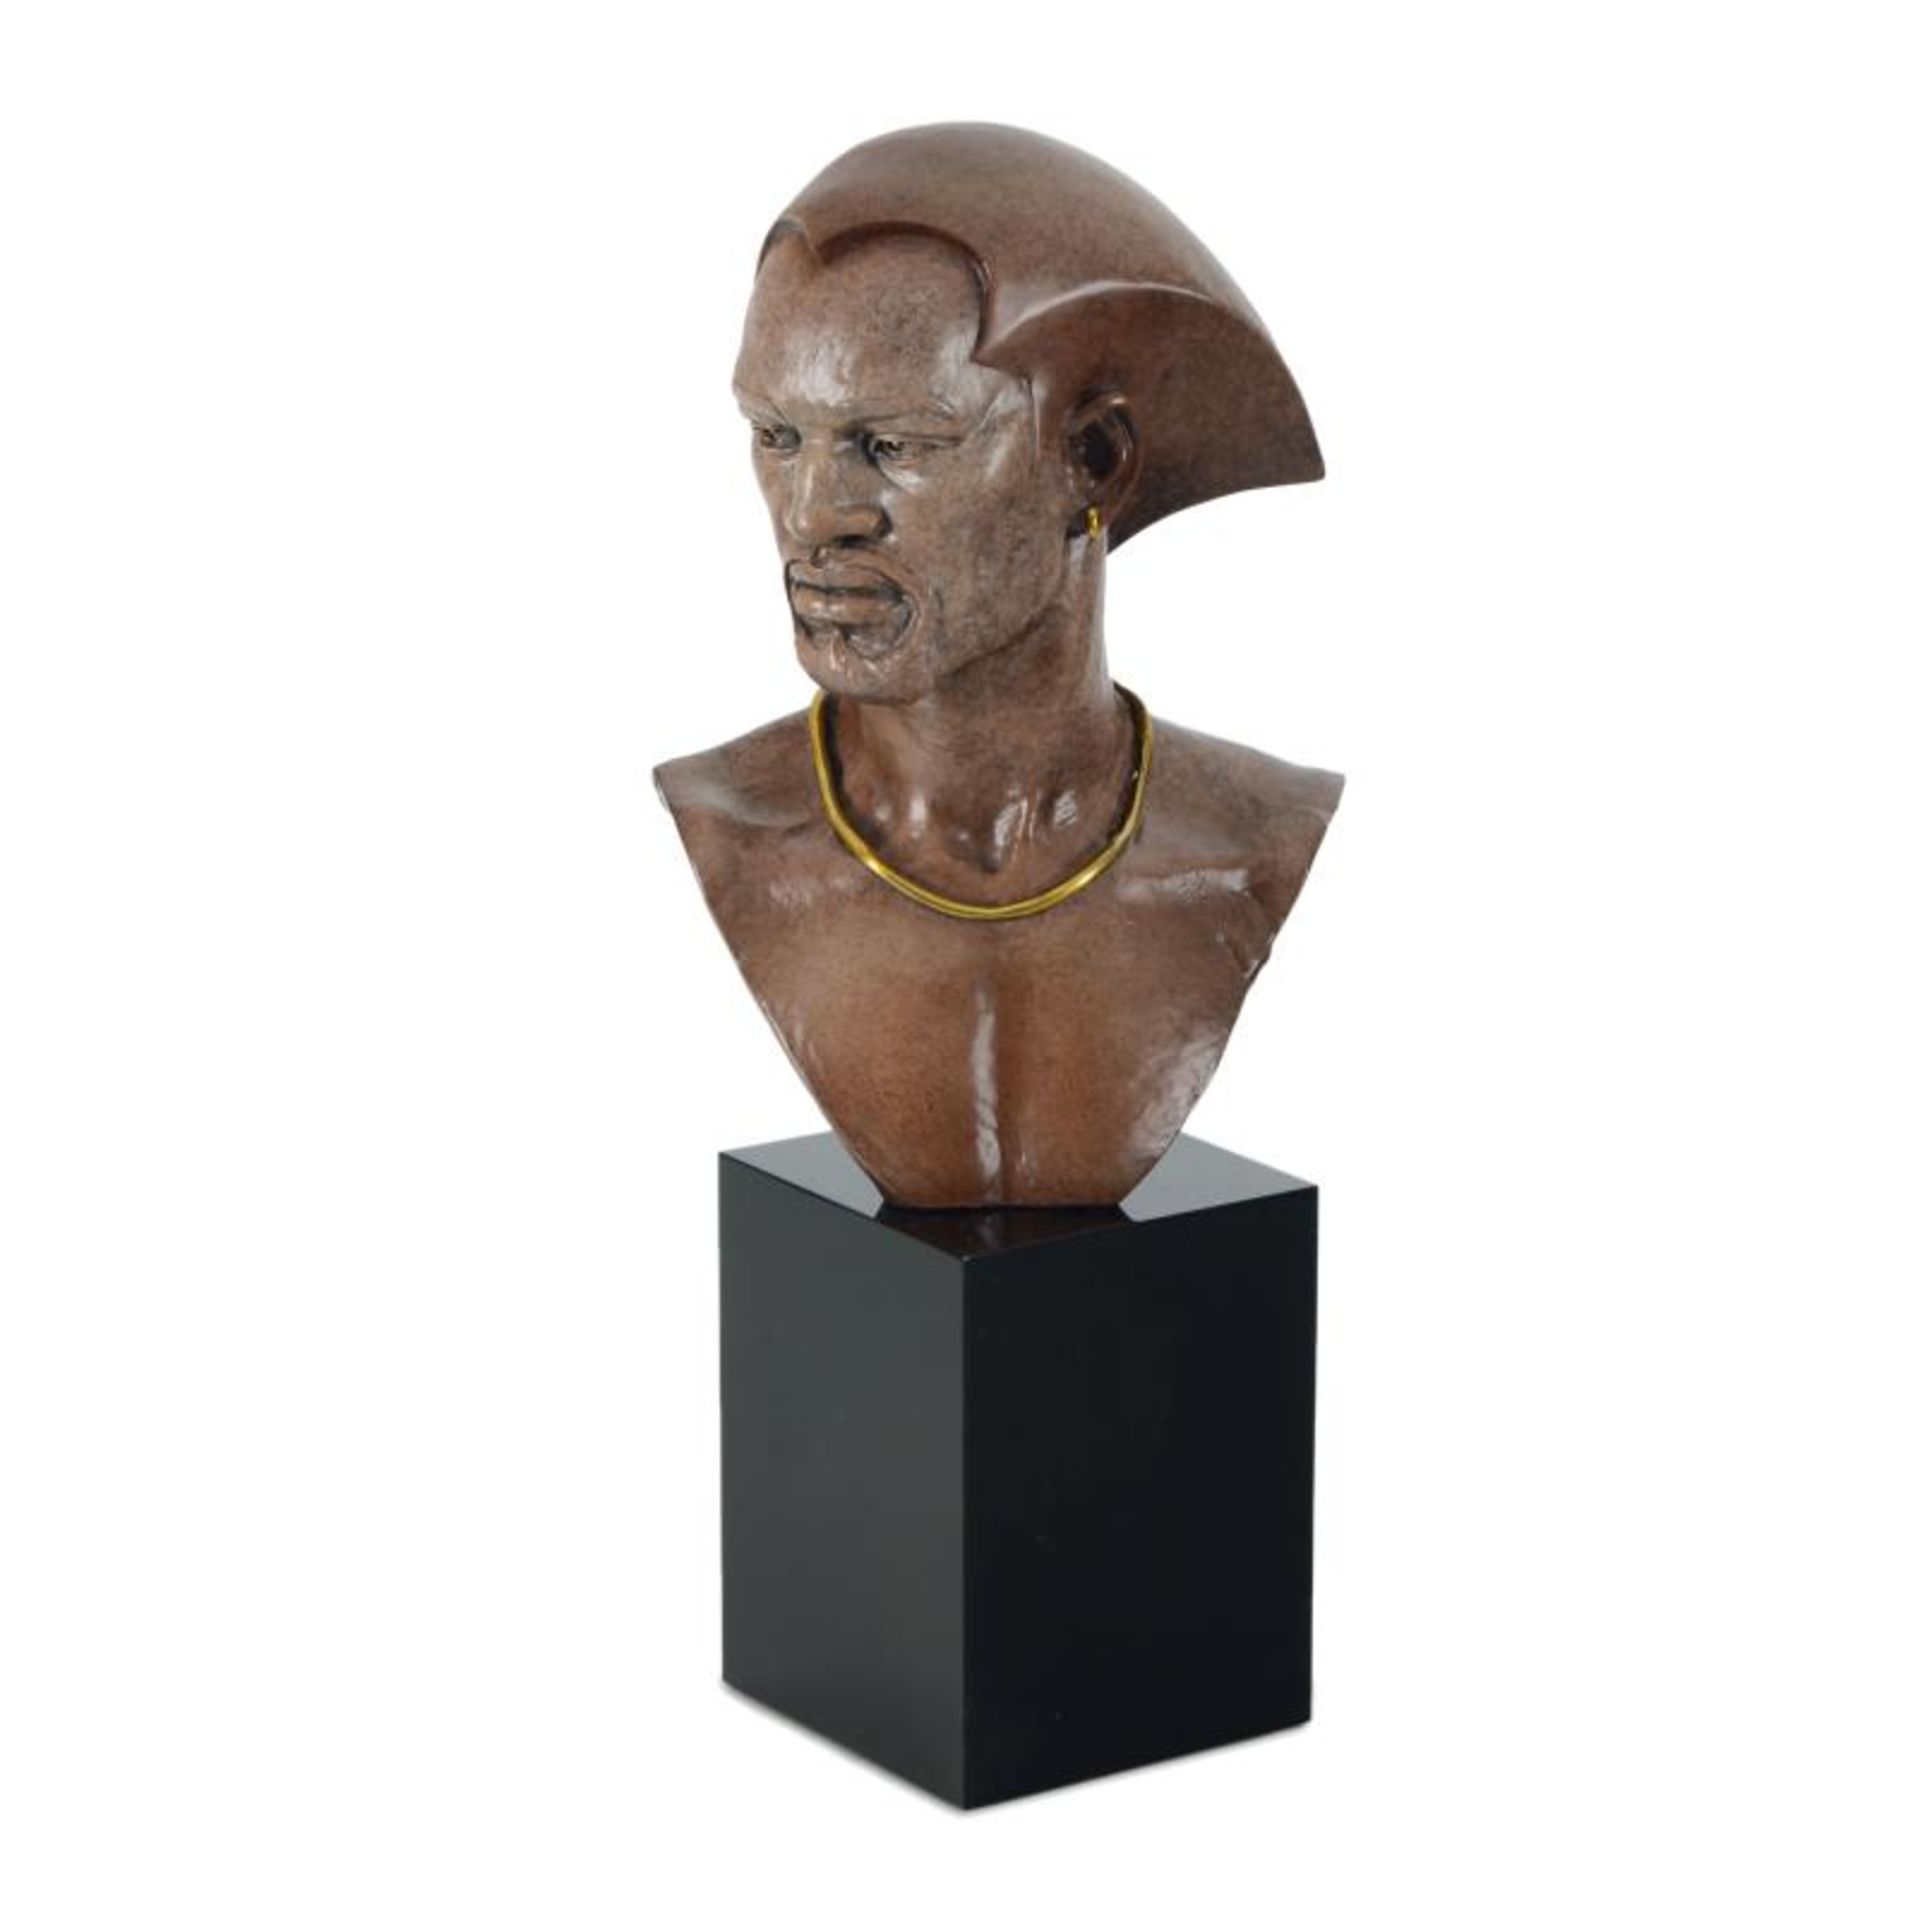 Thomas Blackshear, "Remembering" Limited Edition Mixed Media Sculpture on Marble